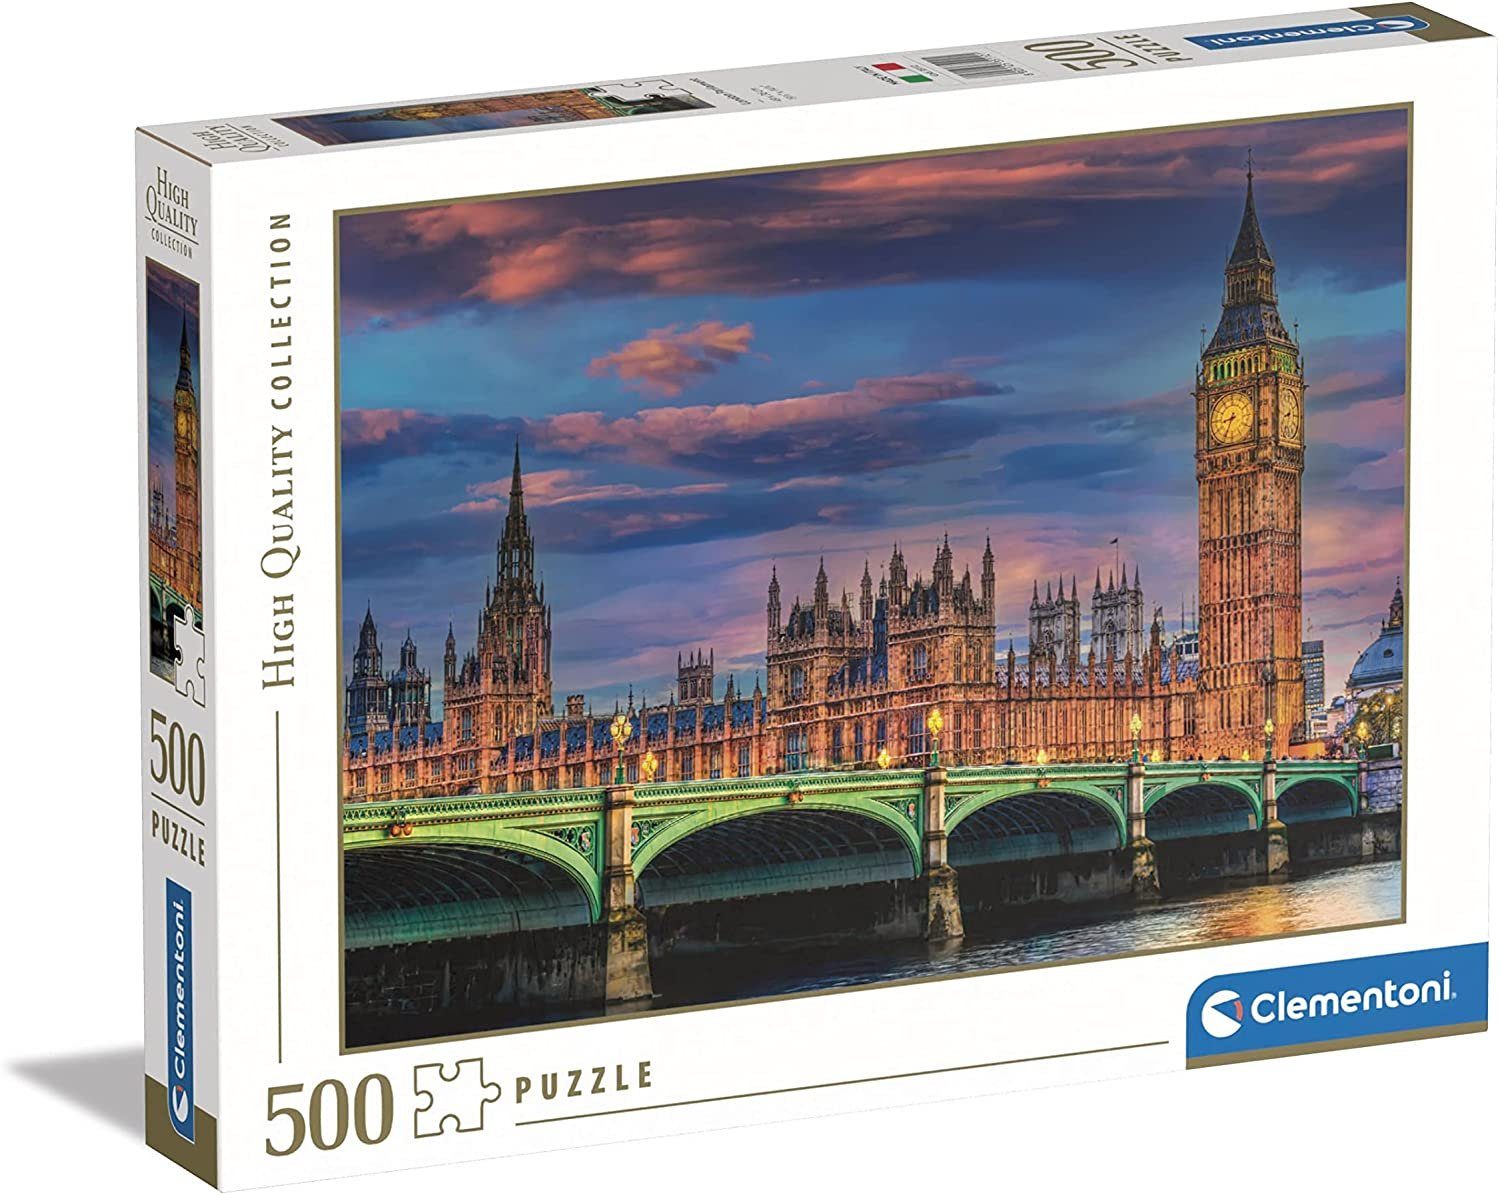 bis in Europe Puzzle 500 Puzzles Puzzleteile, Made Teile Clem-35112, Clementoni®